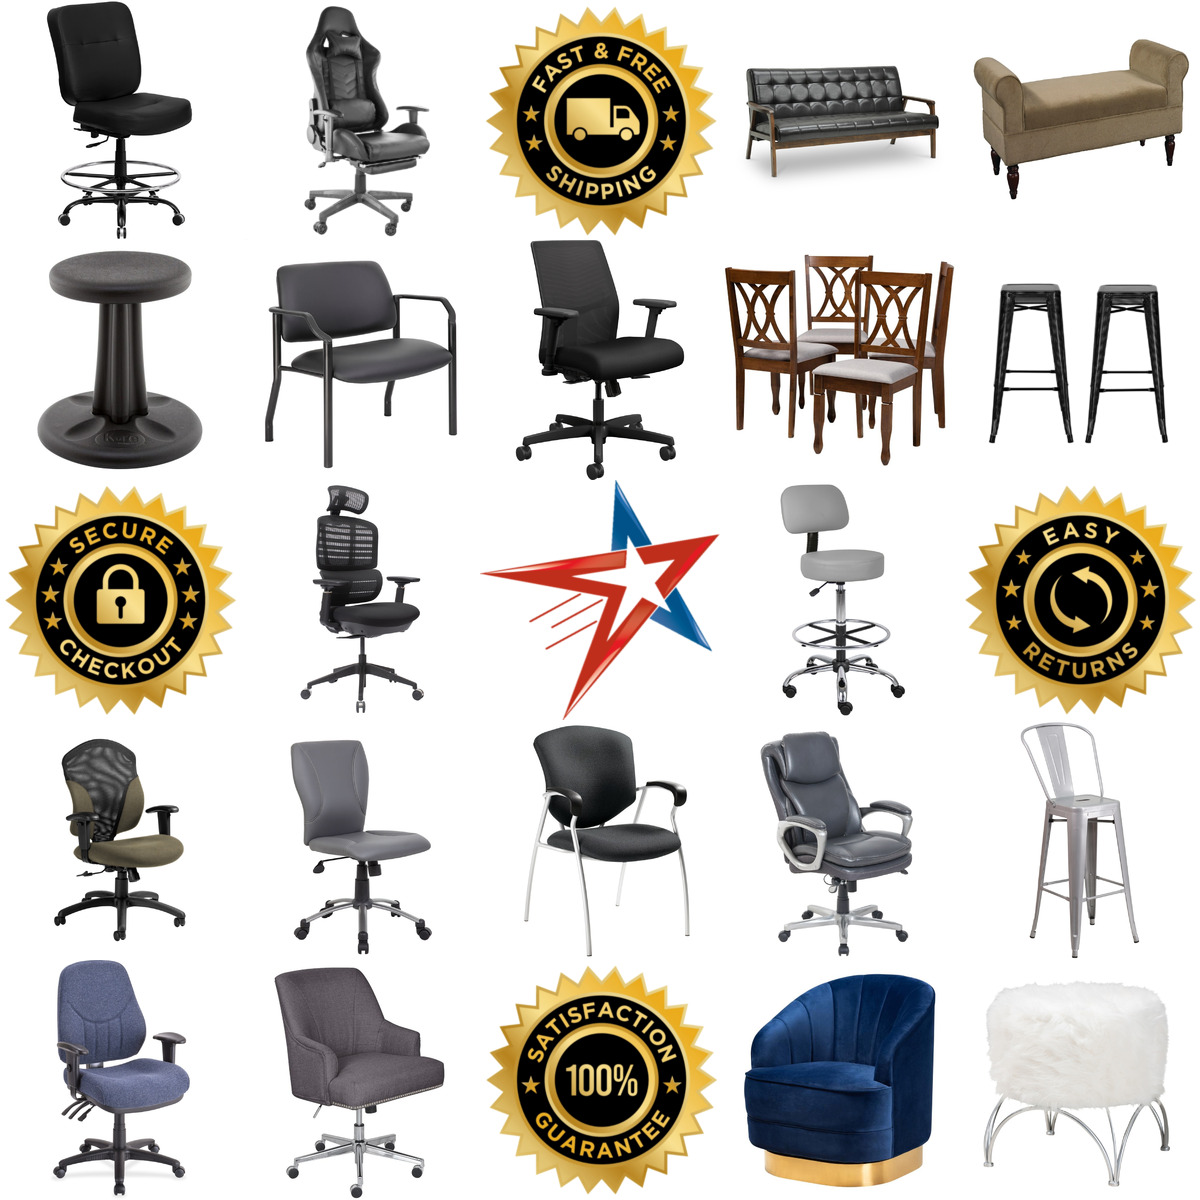 A selection of Chairs and Seating products on GoVets